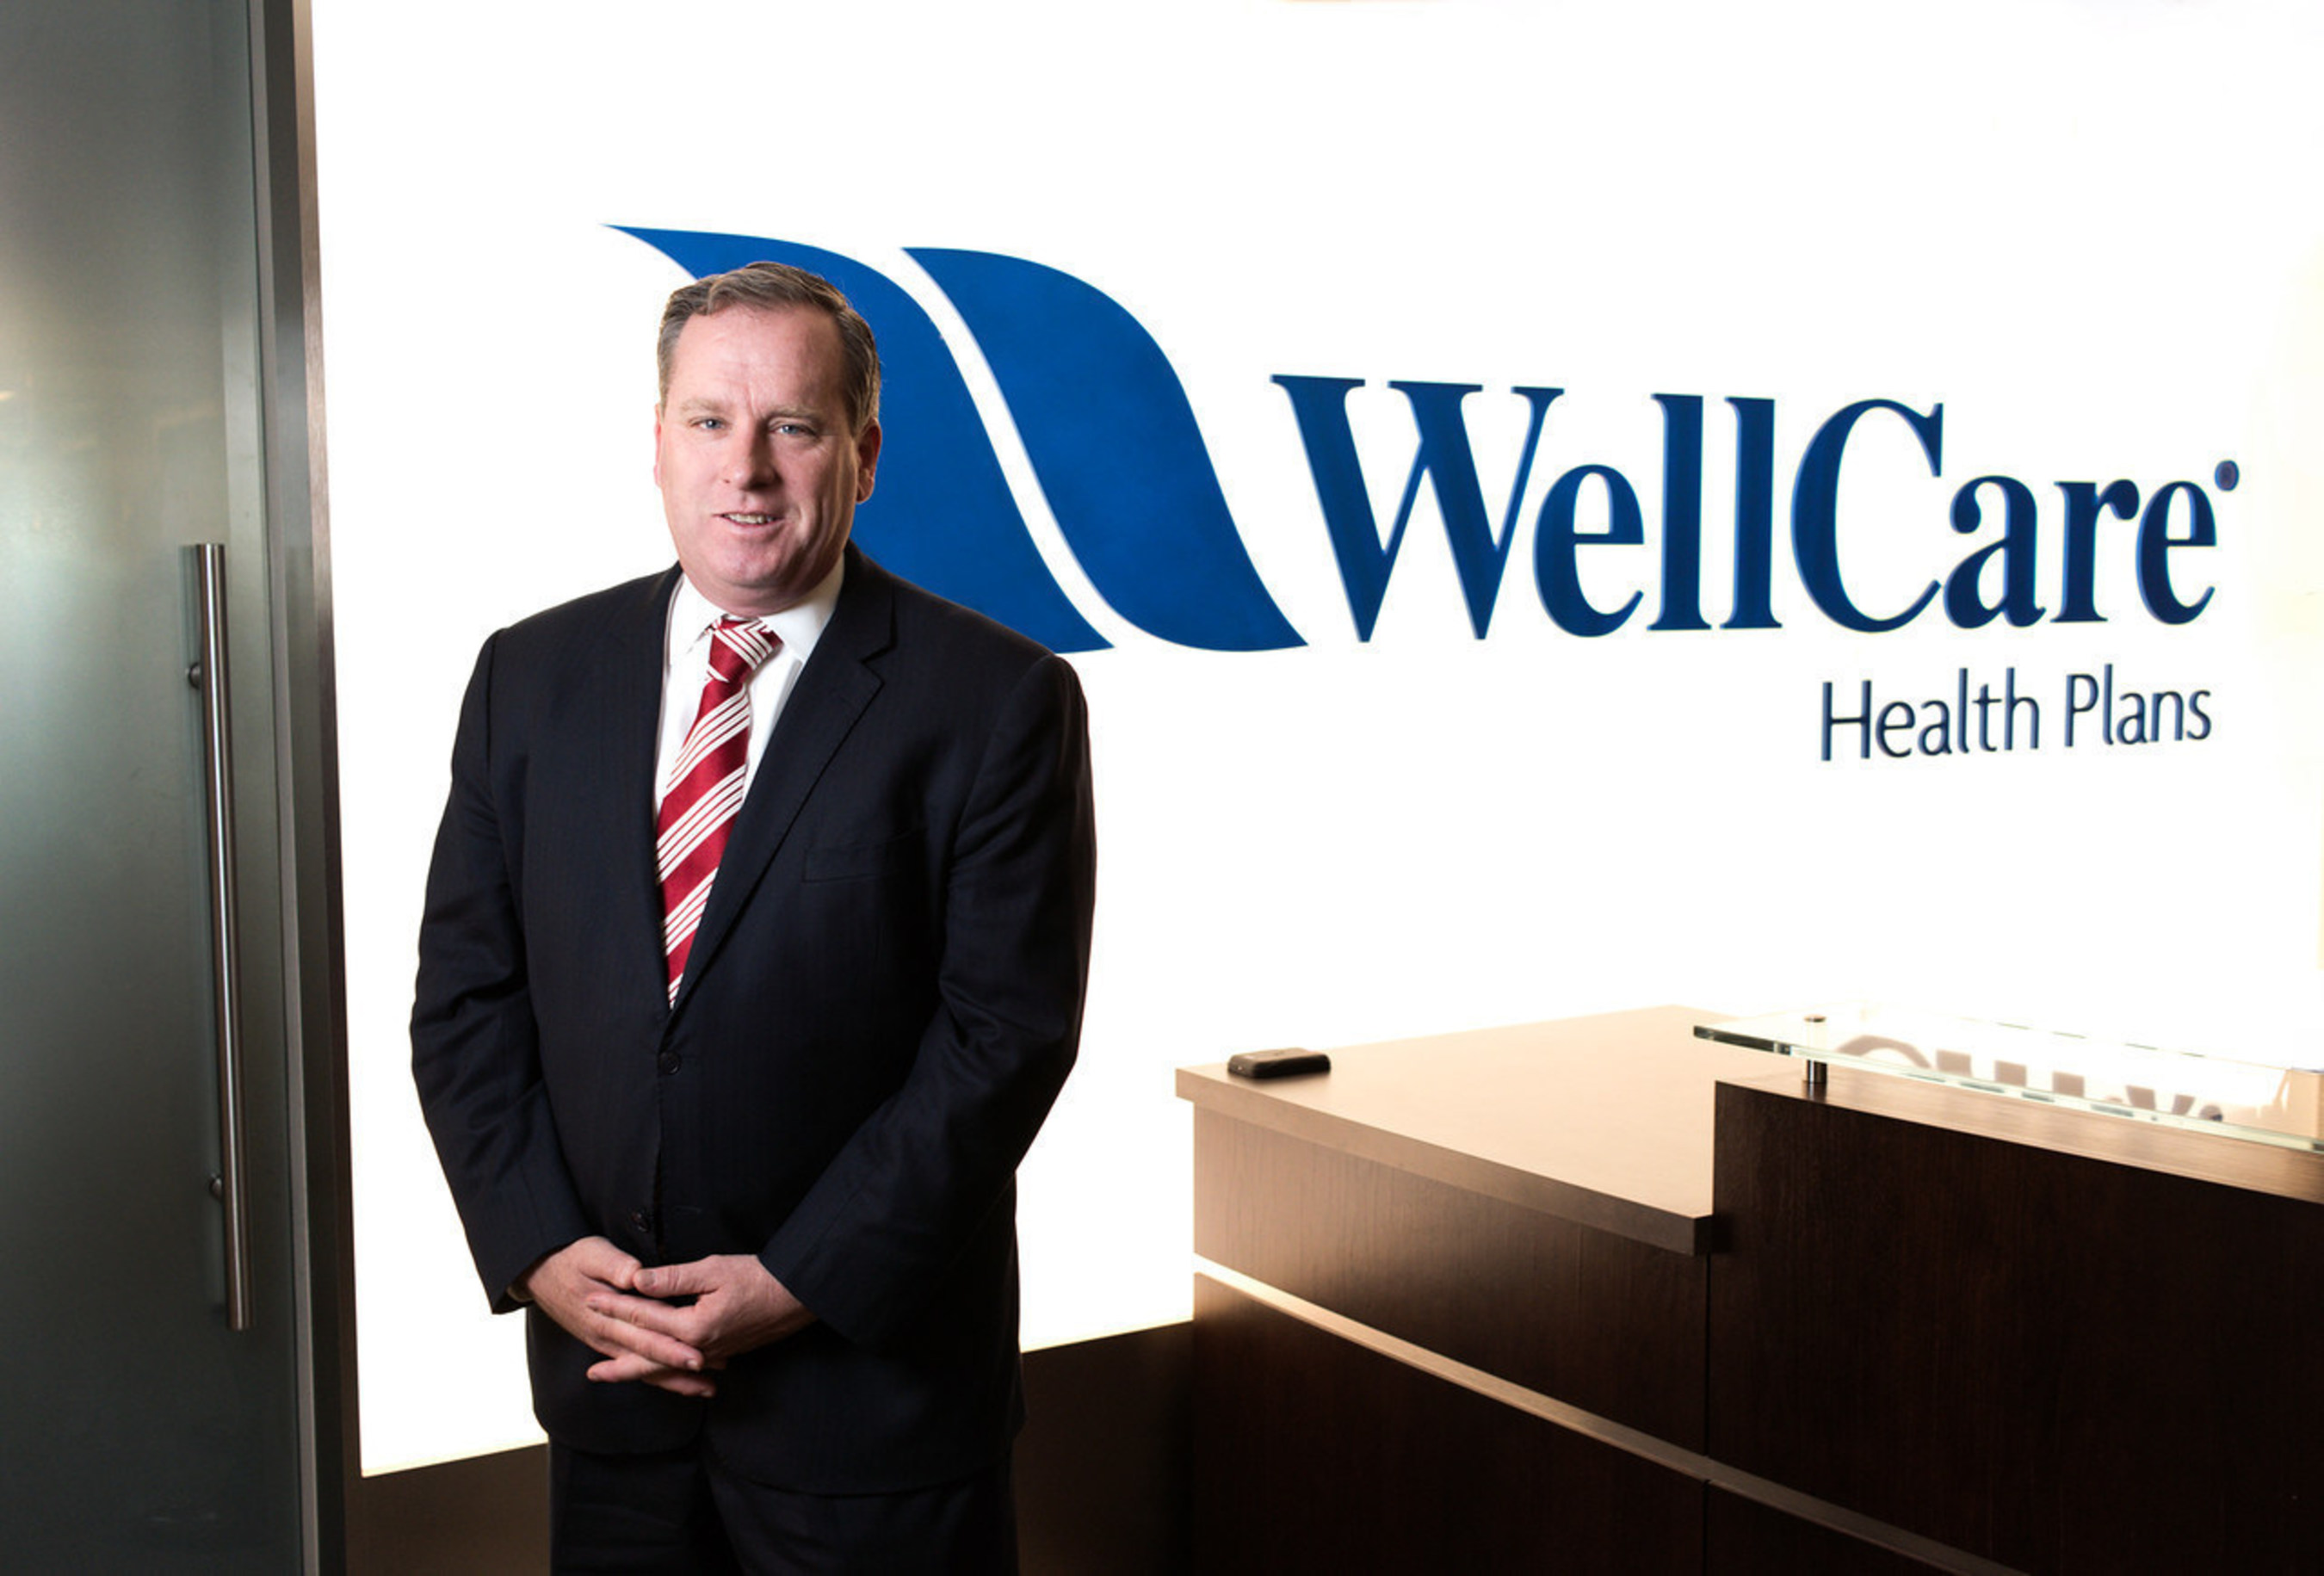 WellCare Health Plans, Inc., (NYSE: WCG) and the Bed-Stuy Campaign Against Hunger (BSCAH) announced today that John J. Burke, WellCare's state president in New York, was awarded BSCAH's 2016 Planter Award in recognition of his "commitment to serving vulnerable New Yorkers."